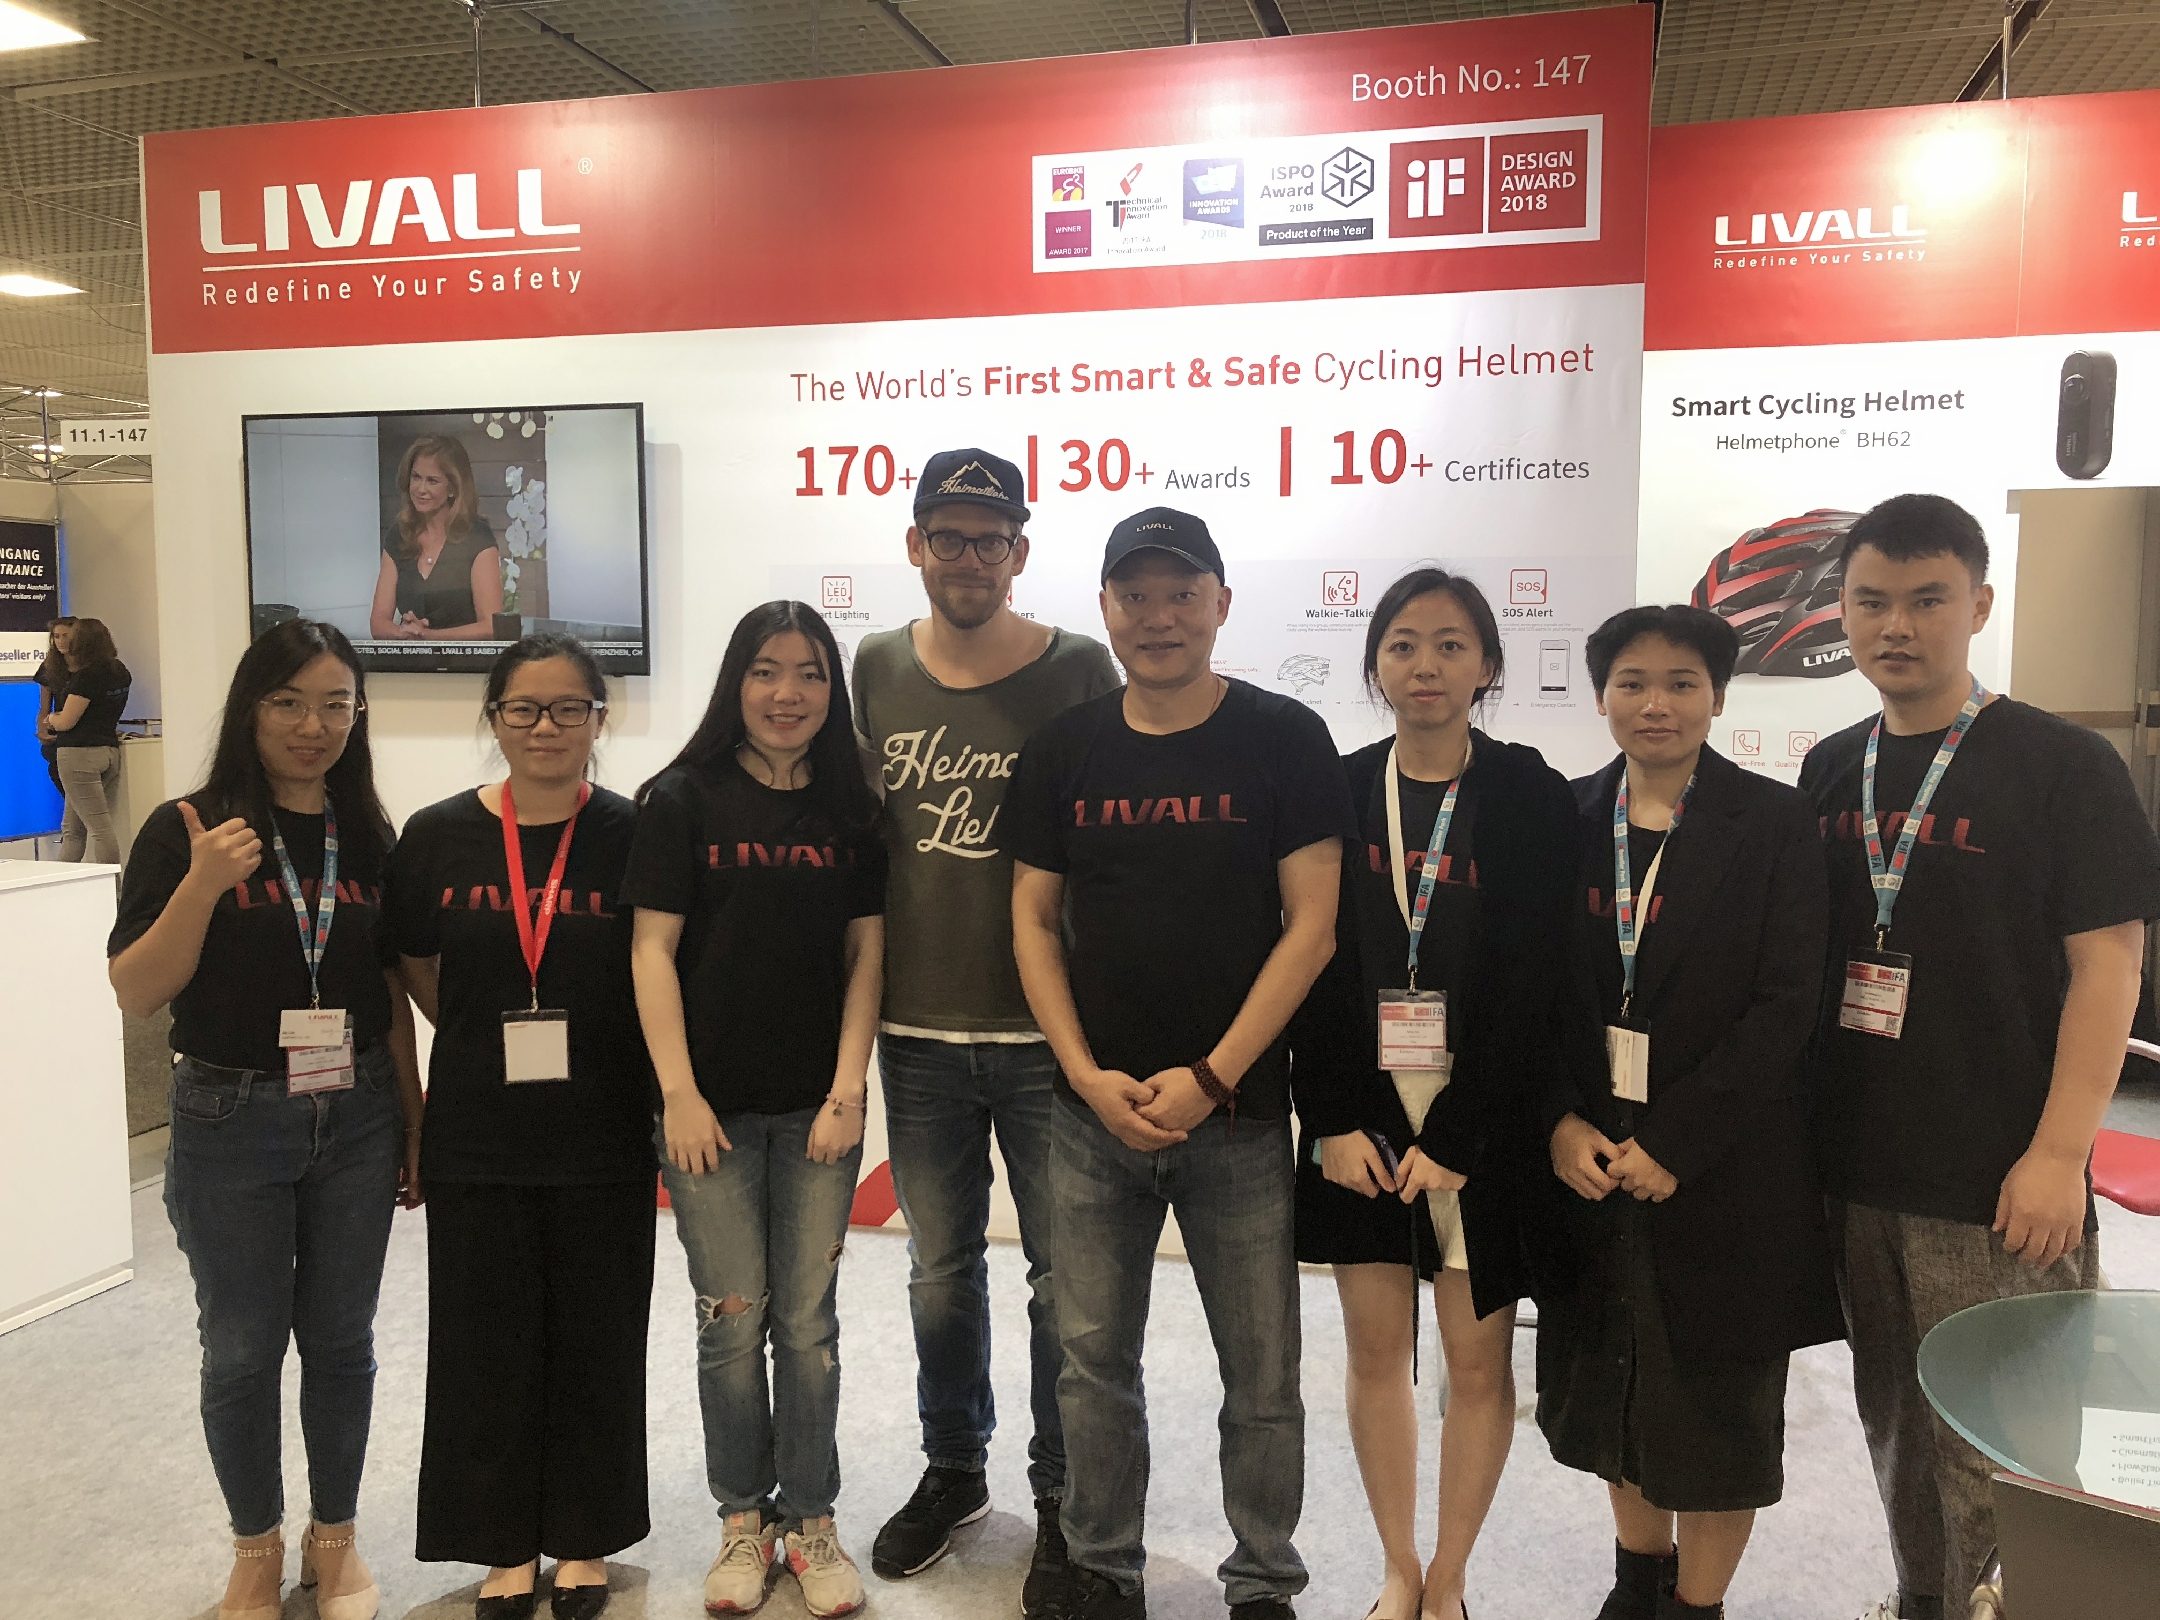 LIVALL Attended IFA 2018